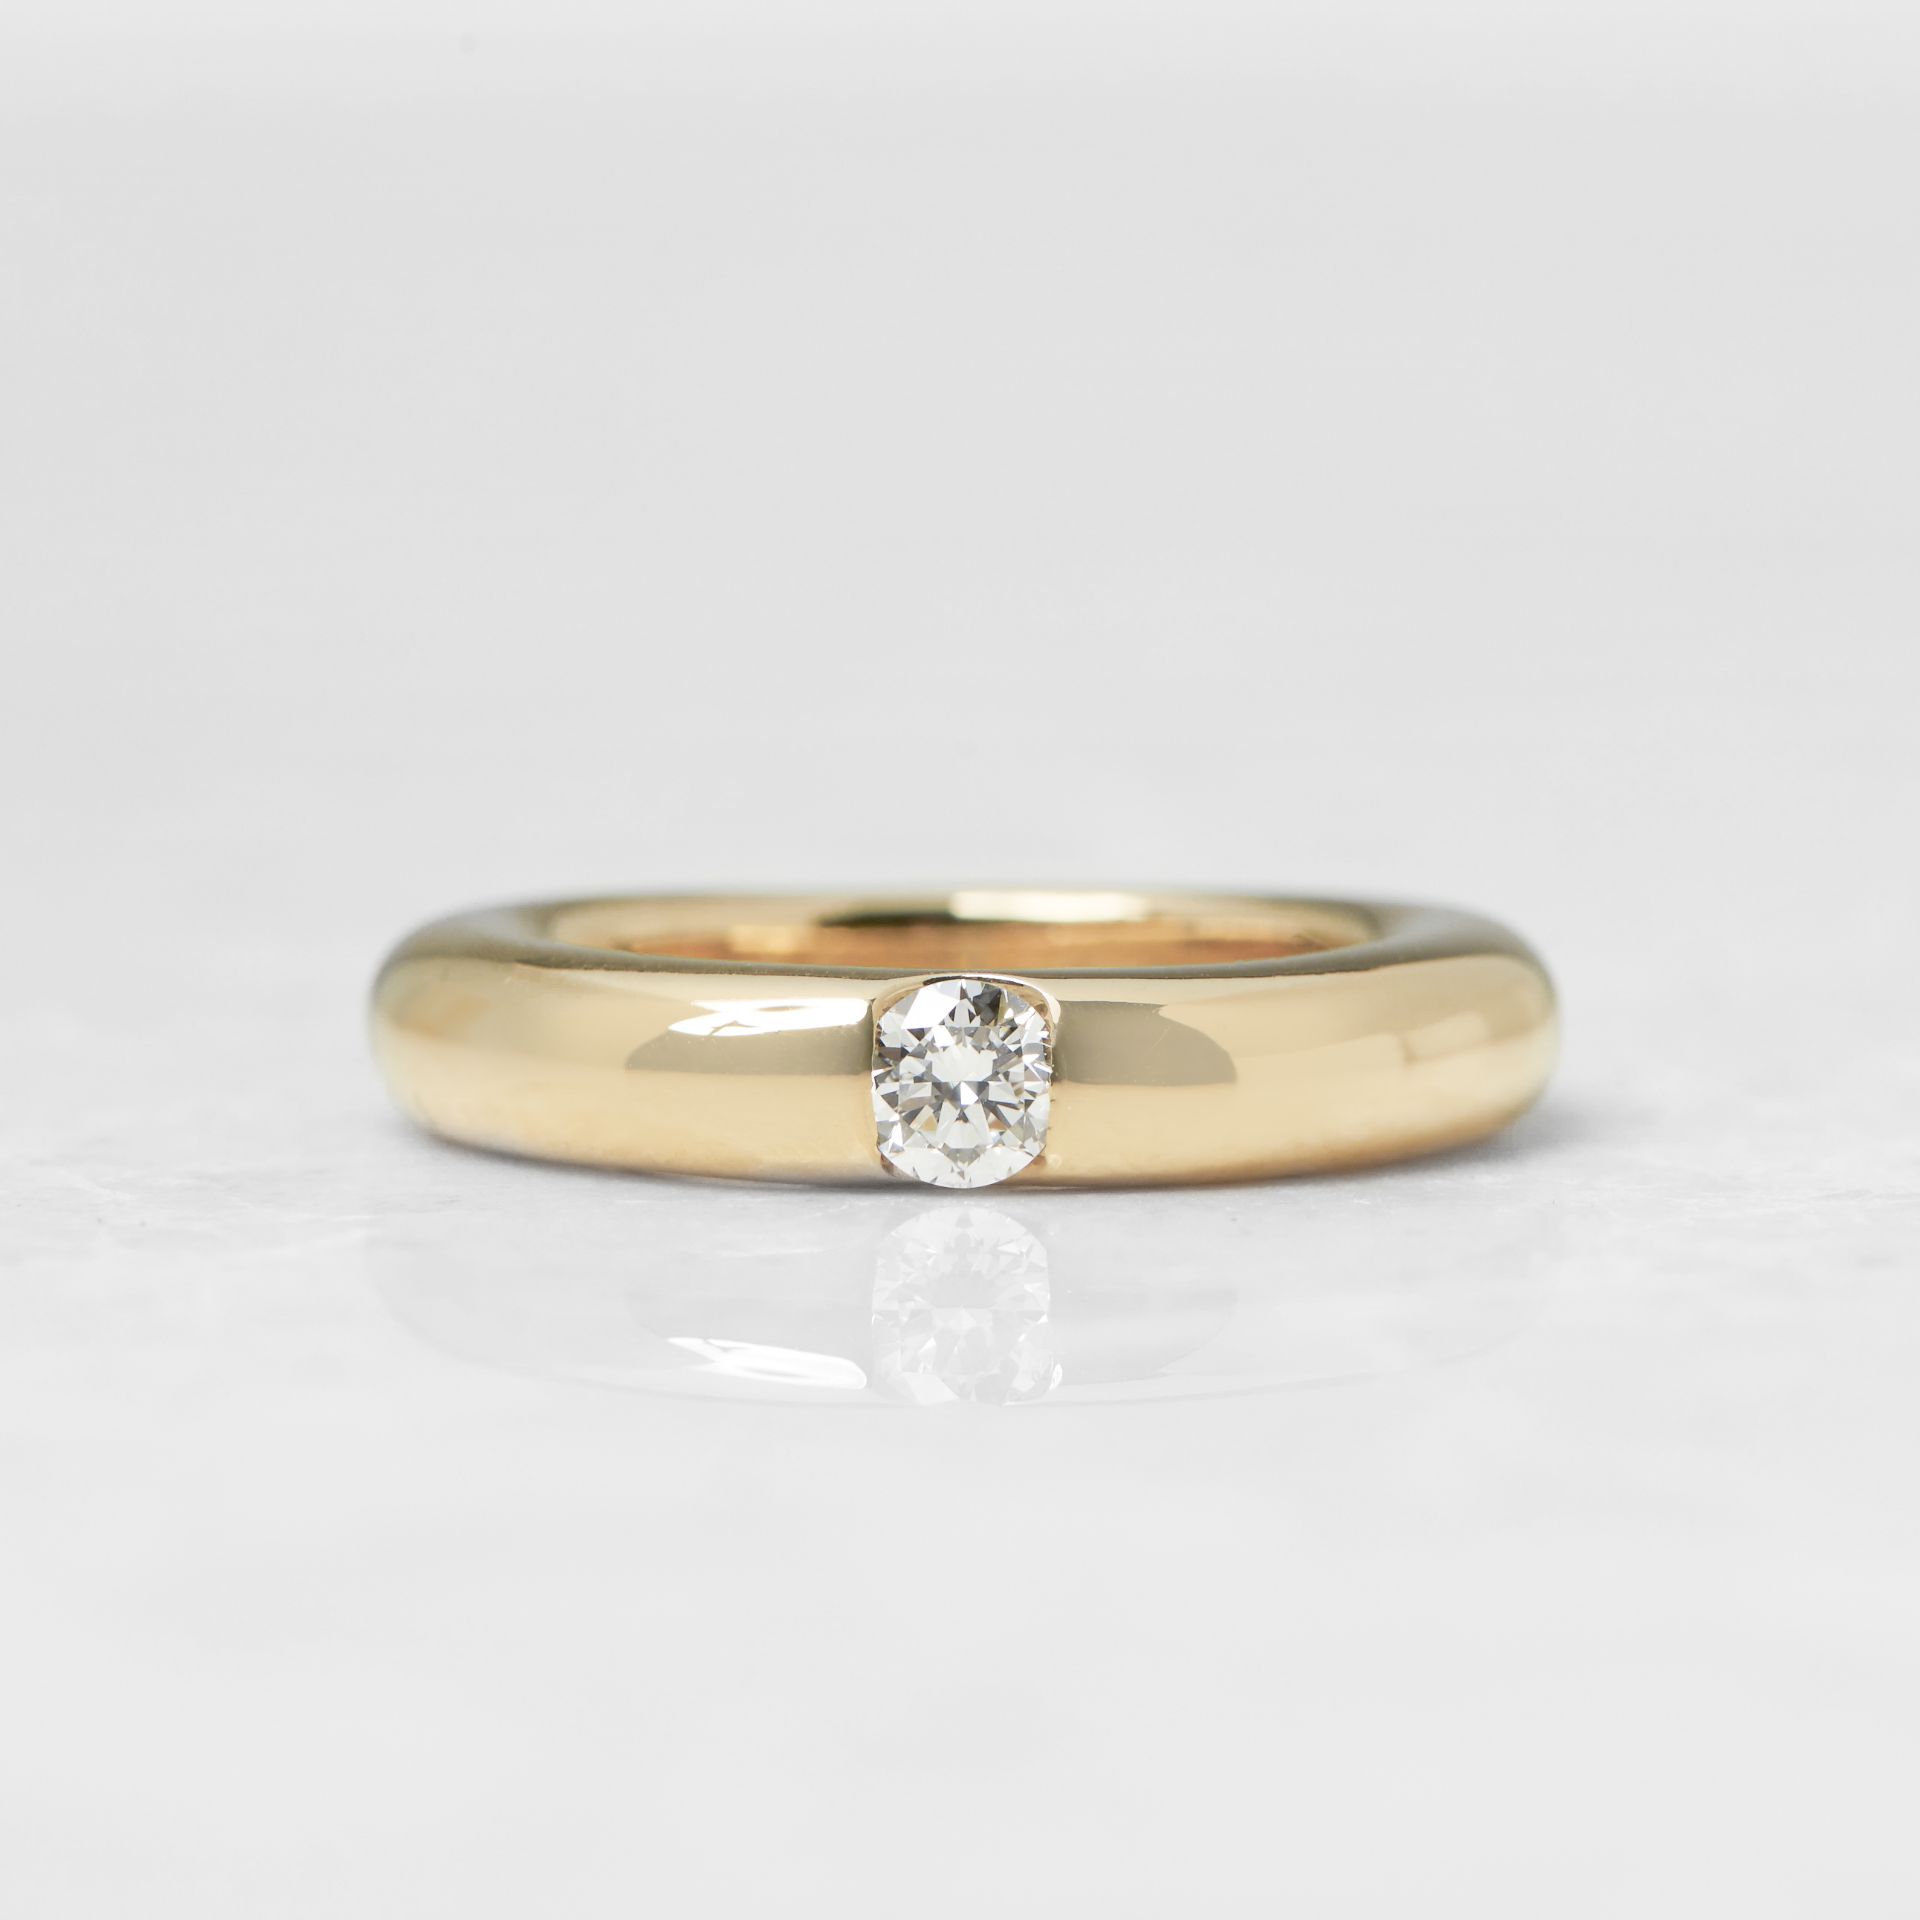 Cartier 18k Yellow Gold 0.25ct Diamond Stackable Elipse Ring - Image 2 of 6